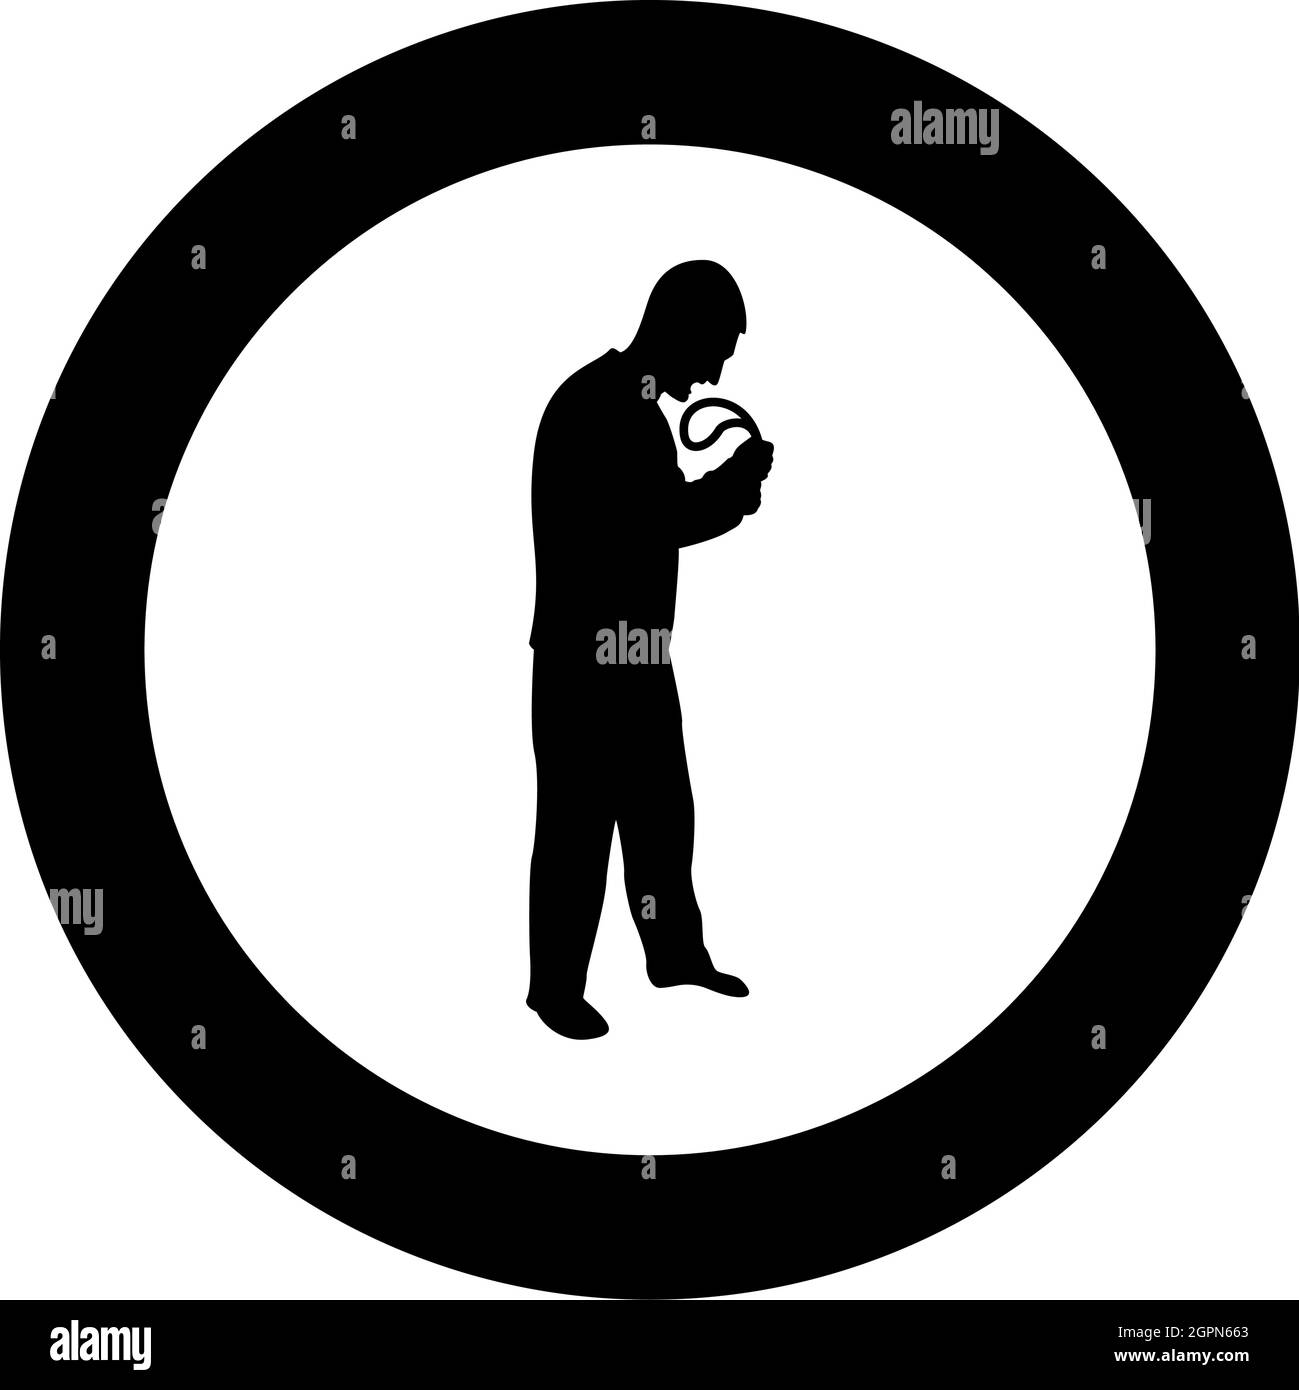 Angry man with belt in hand for punishment warns Violence in family concept Abuse idea Domestic trouble Fury male threatening victim Social problem Husband father emotionally aggression against human Bullying silhouette in circle round black color vector Stock Vector